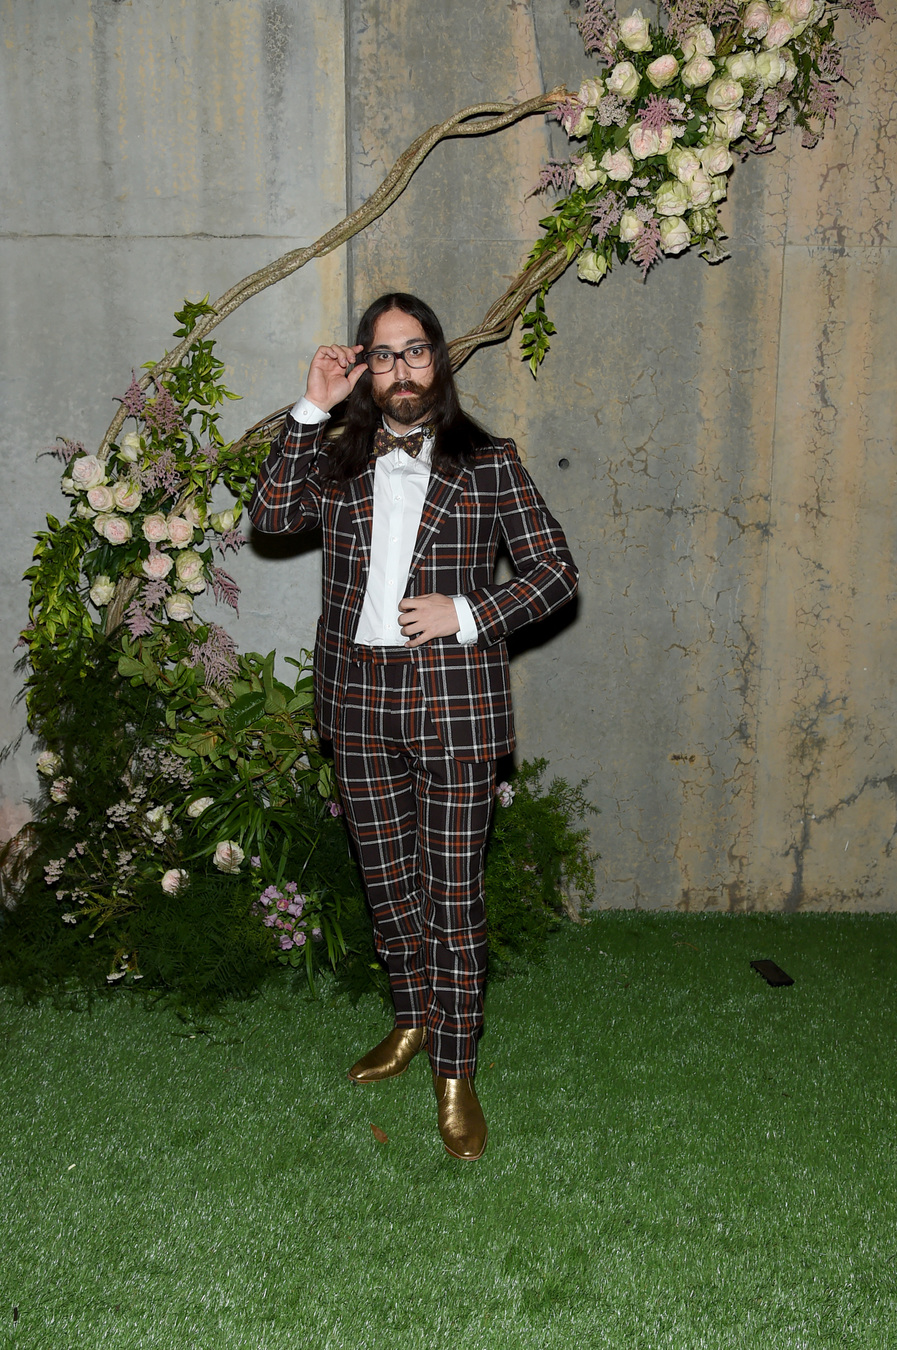 NEW YORK, NY - MAY 02: Singer Sean Lennon attends the Gucci Bloom Fragrance Launch at MoMA PS.1 on May 2, 2017 in New York City. (Photo by Jamie McCarthy/Getty Images for Gucci)